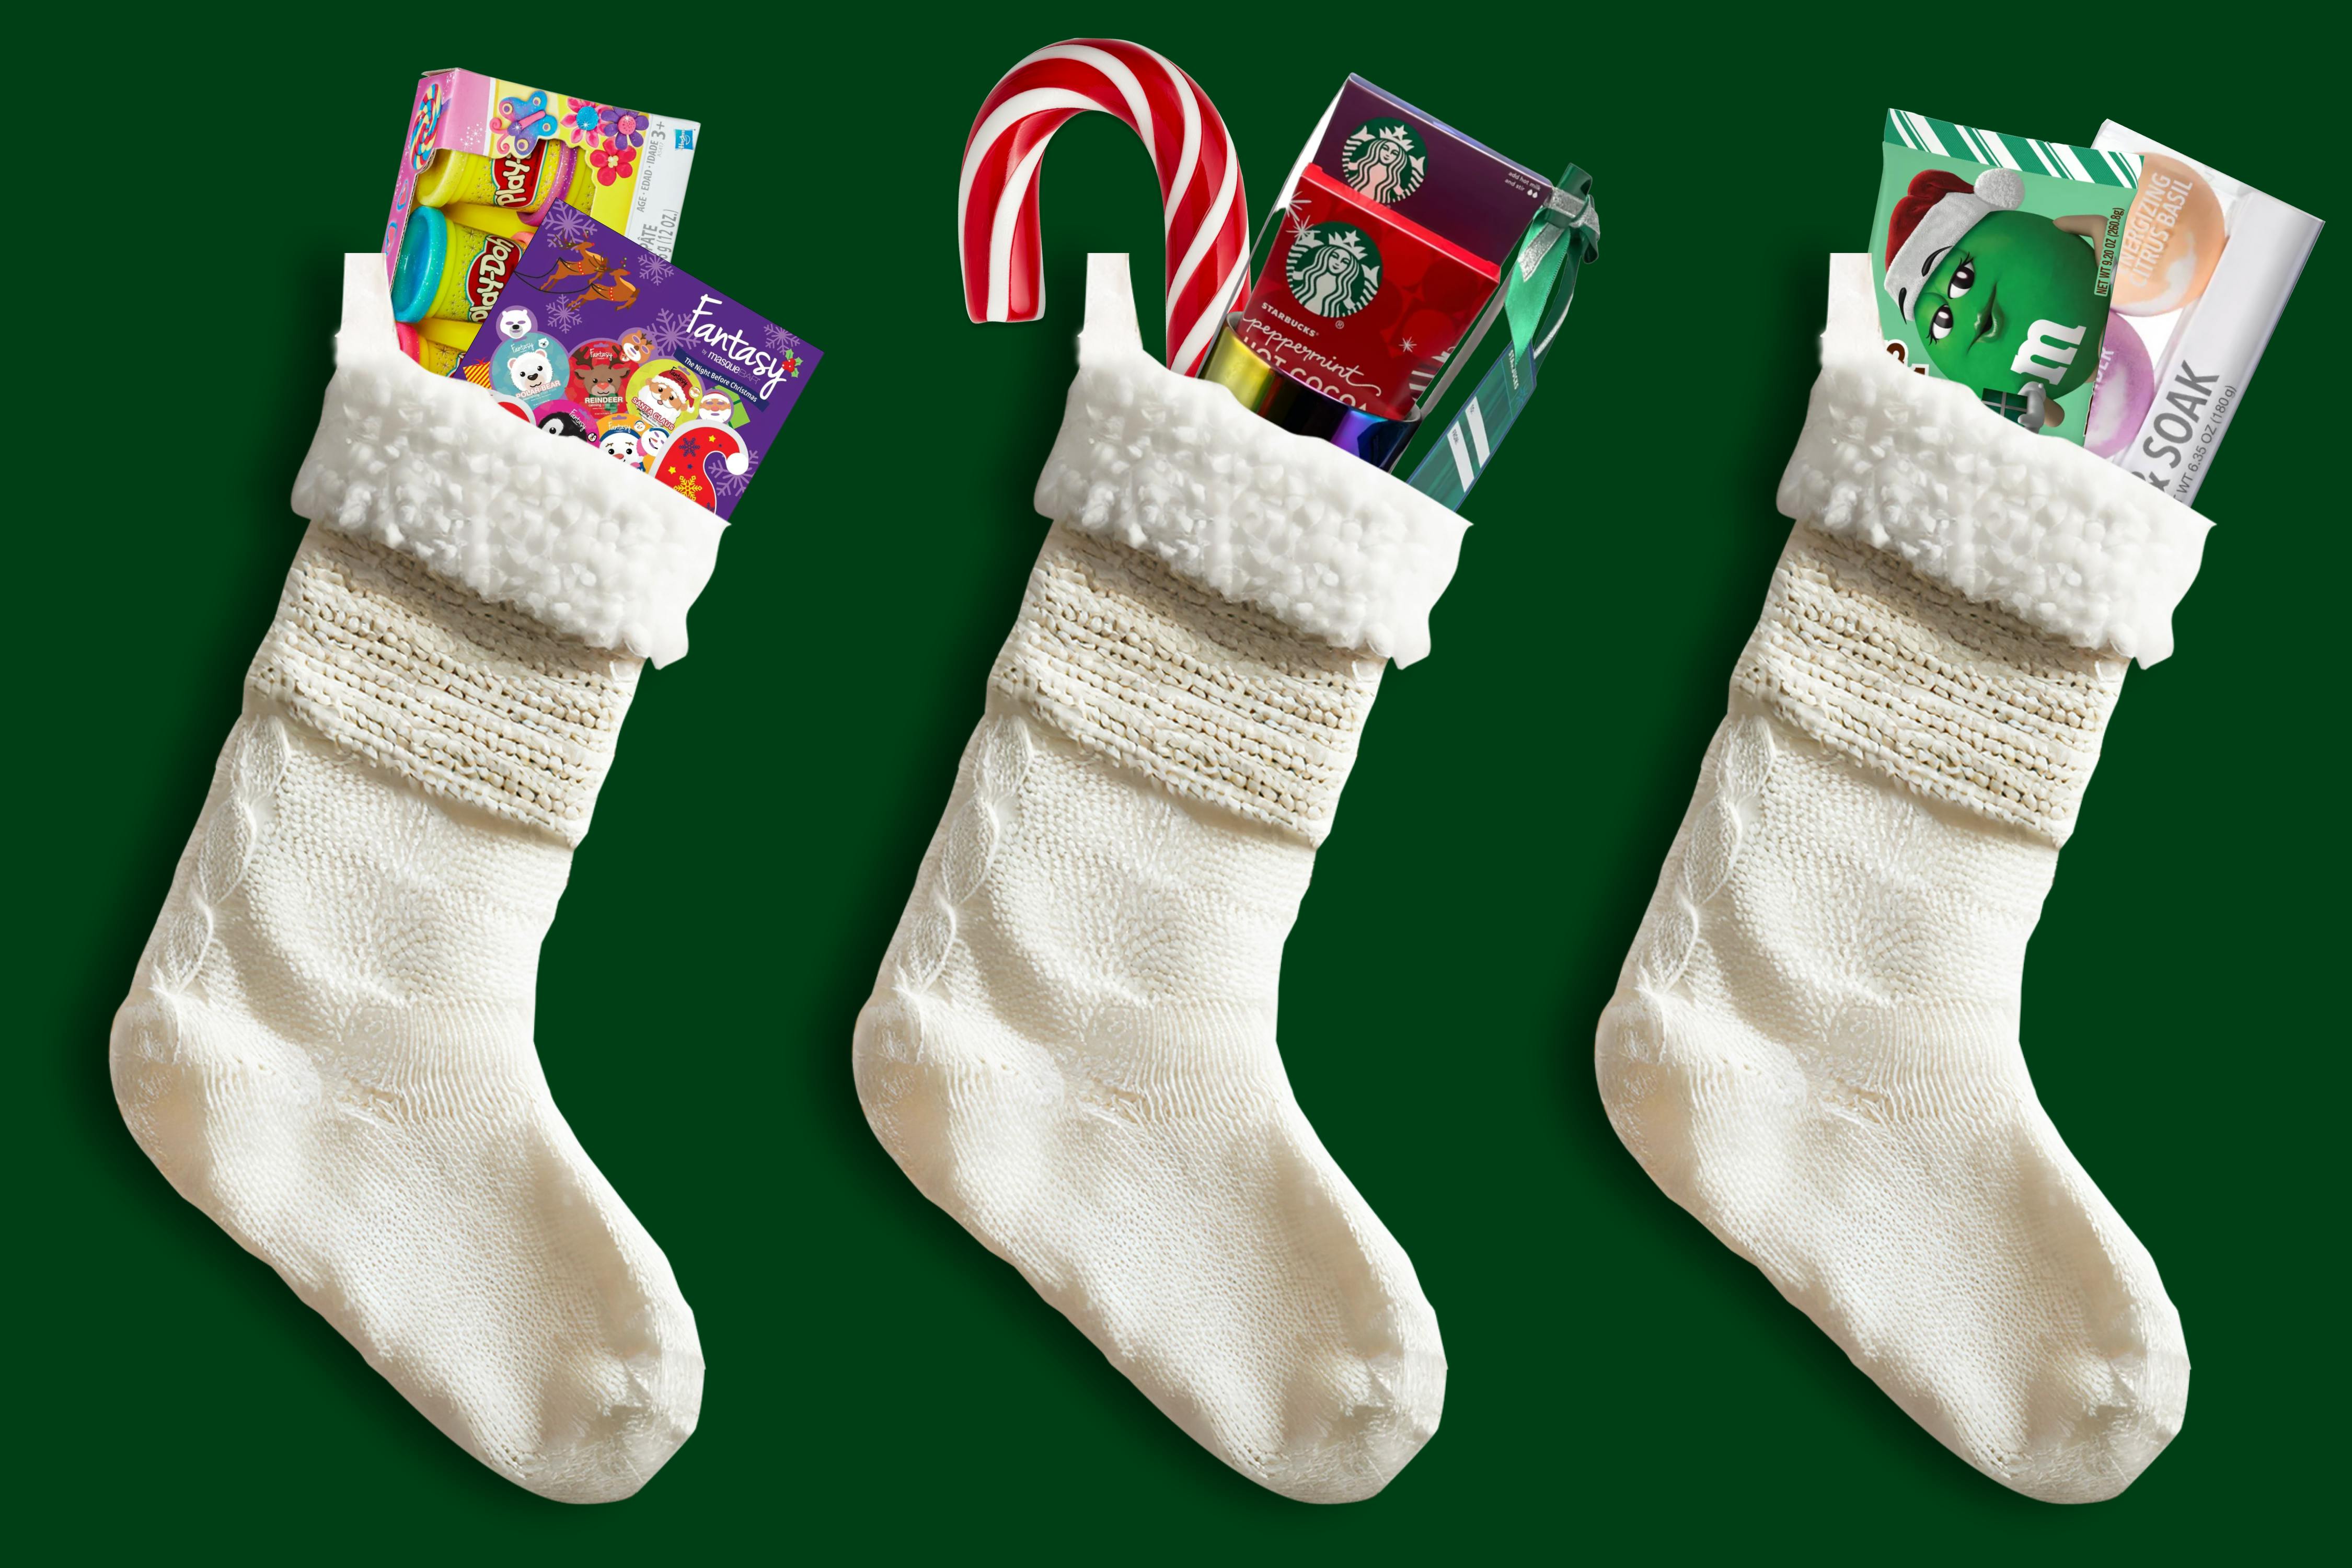 10 Cute Stocking Stuffers You Can Grab from CVS for Under $5